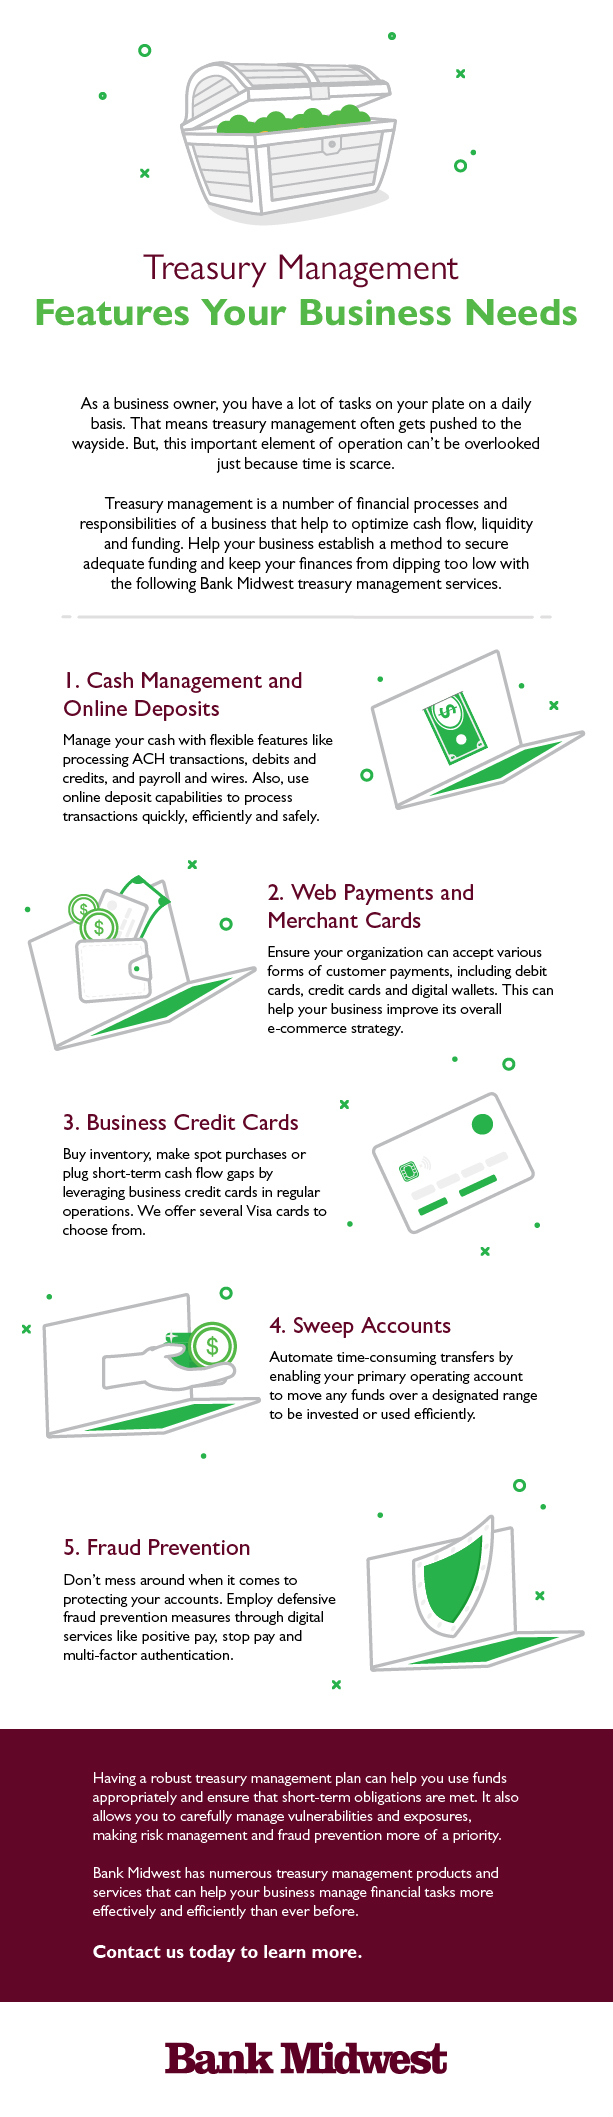 Infographic outlining Treasury Management features